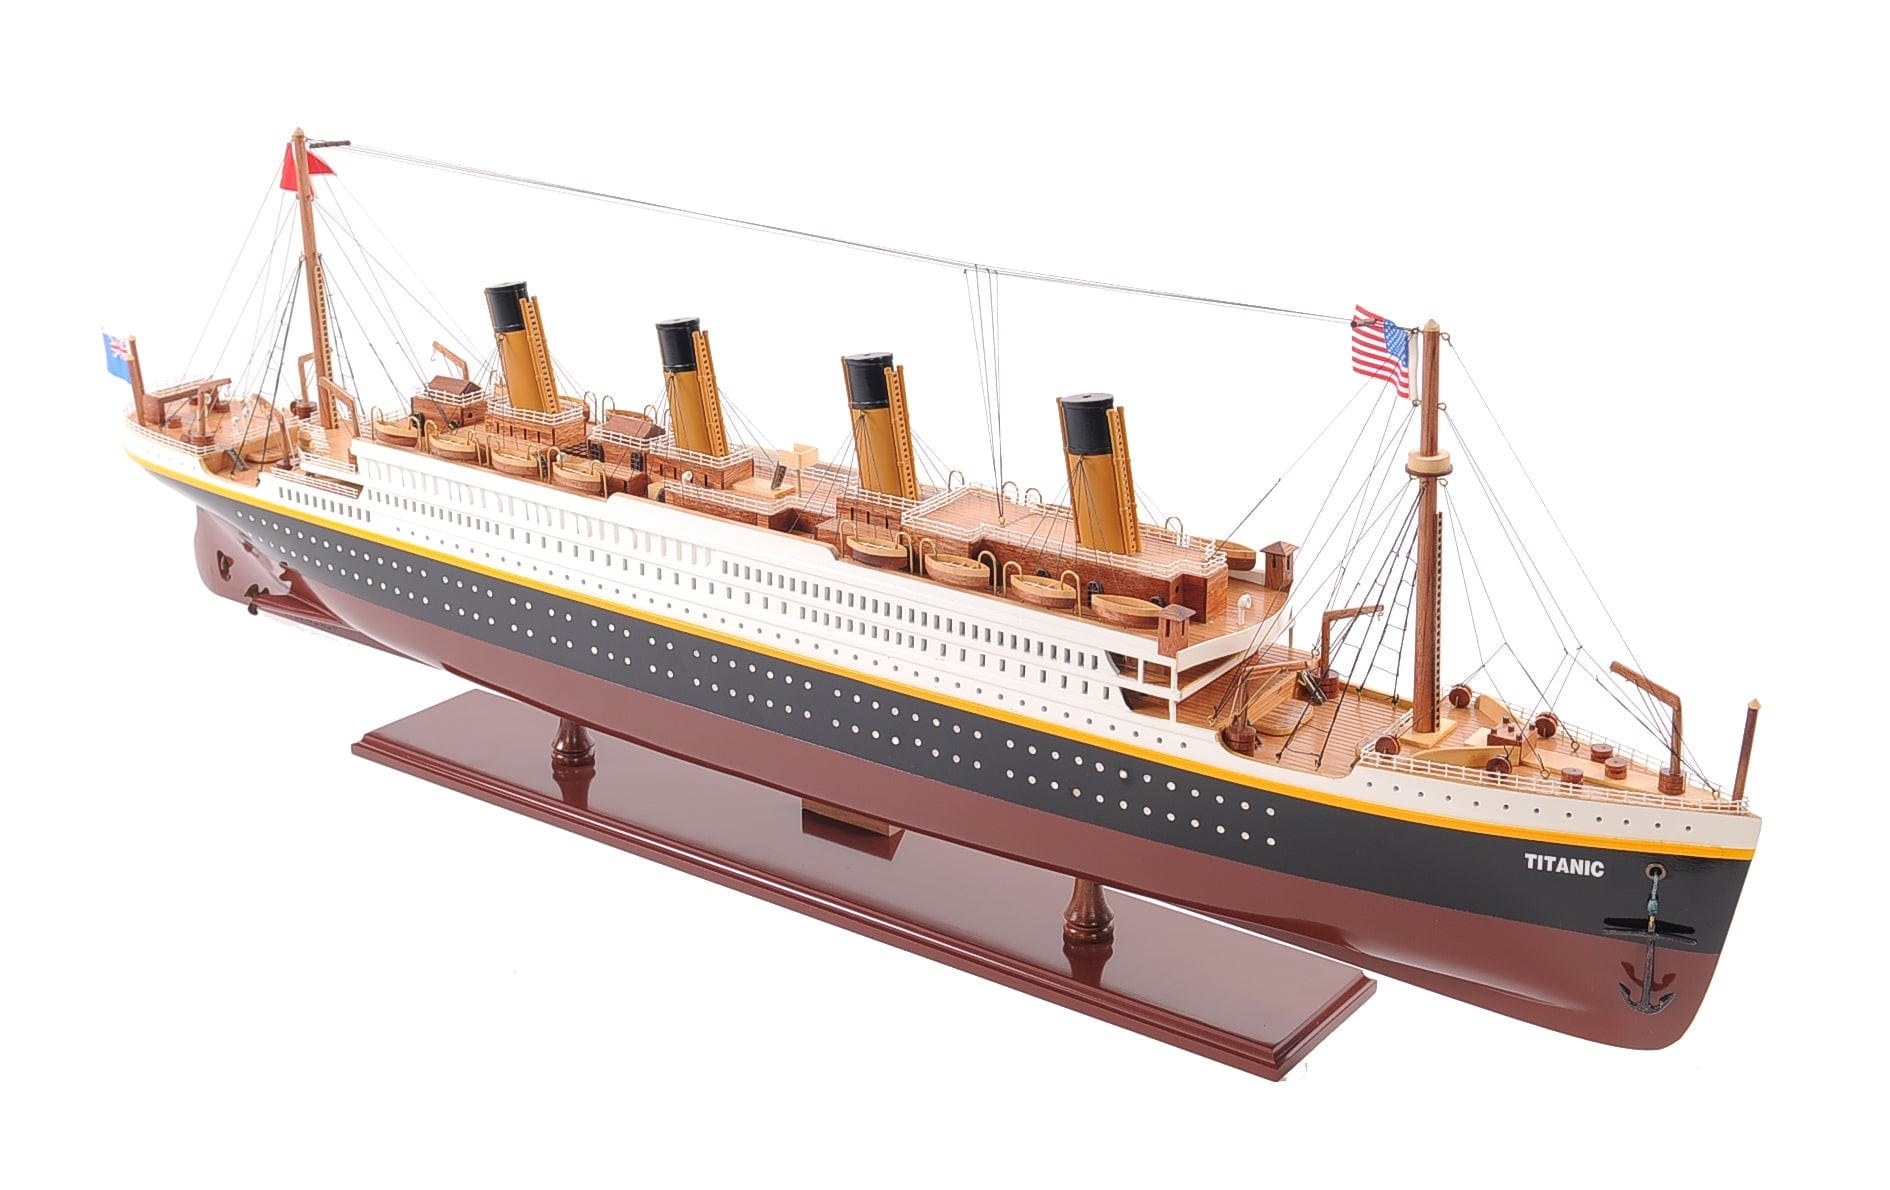 ALDO Hobbies & Creative Arts> Collectibles> Scale Model RMS Titanic Painted Medium Passenger Ship Ocean Liner Wood Model With Display Case Assembled.